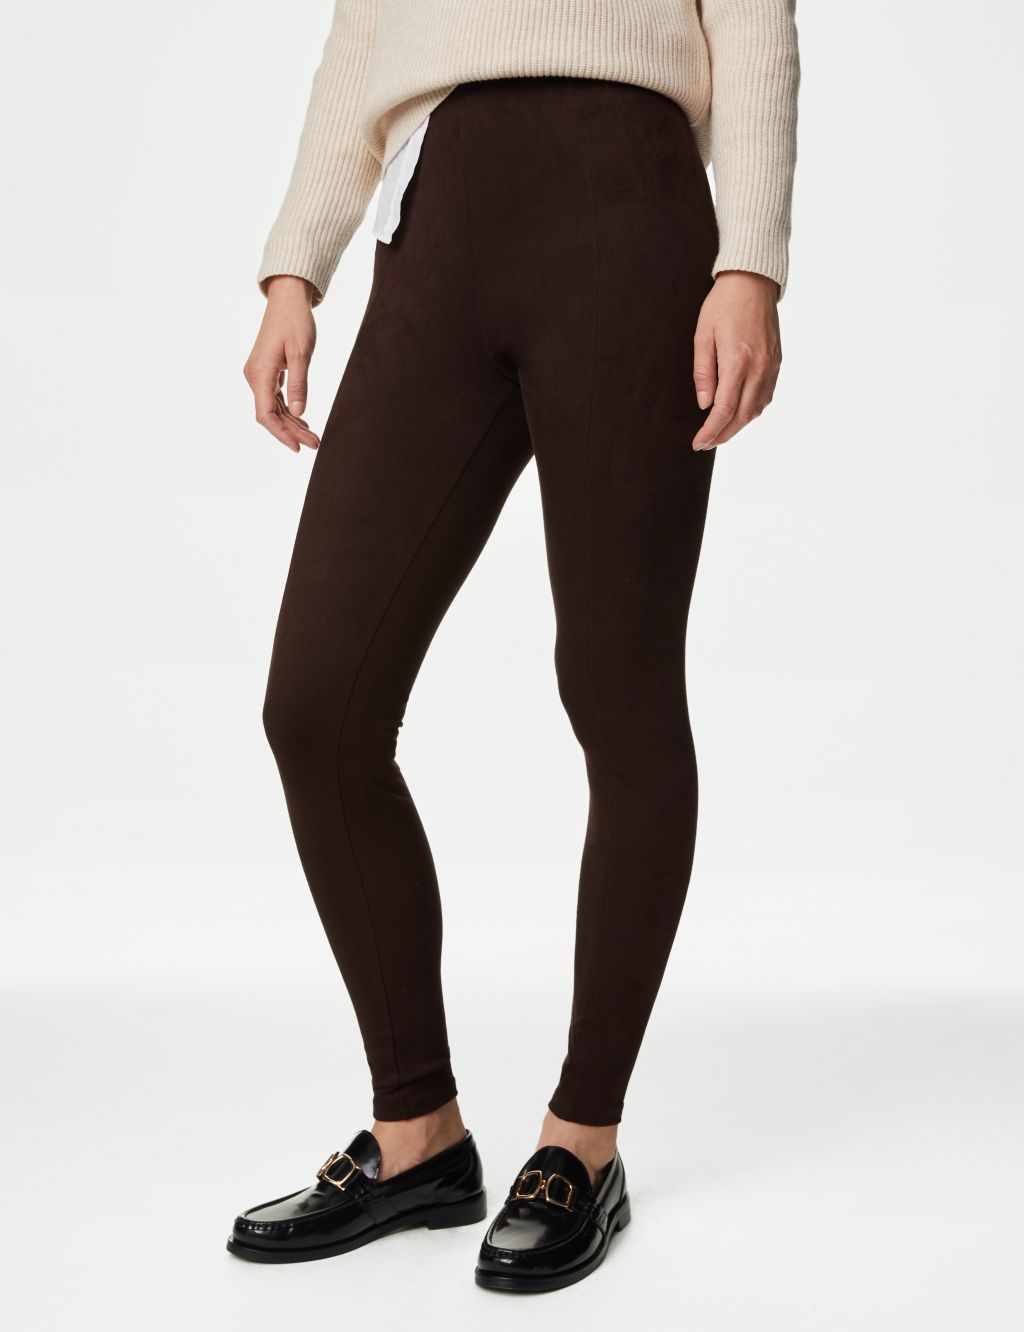 Suedette High Waisted Leggings image 3